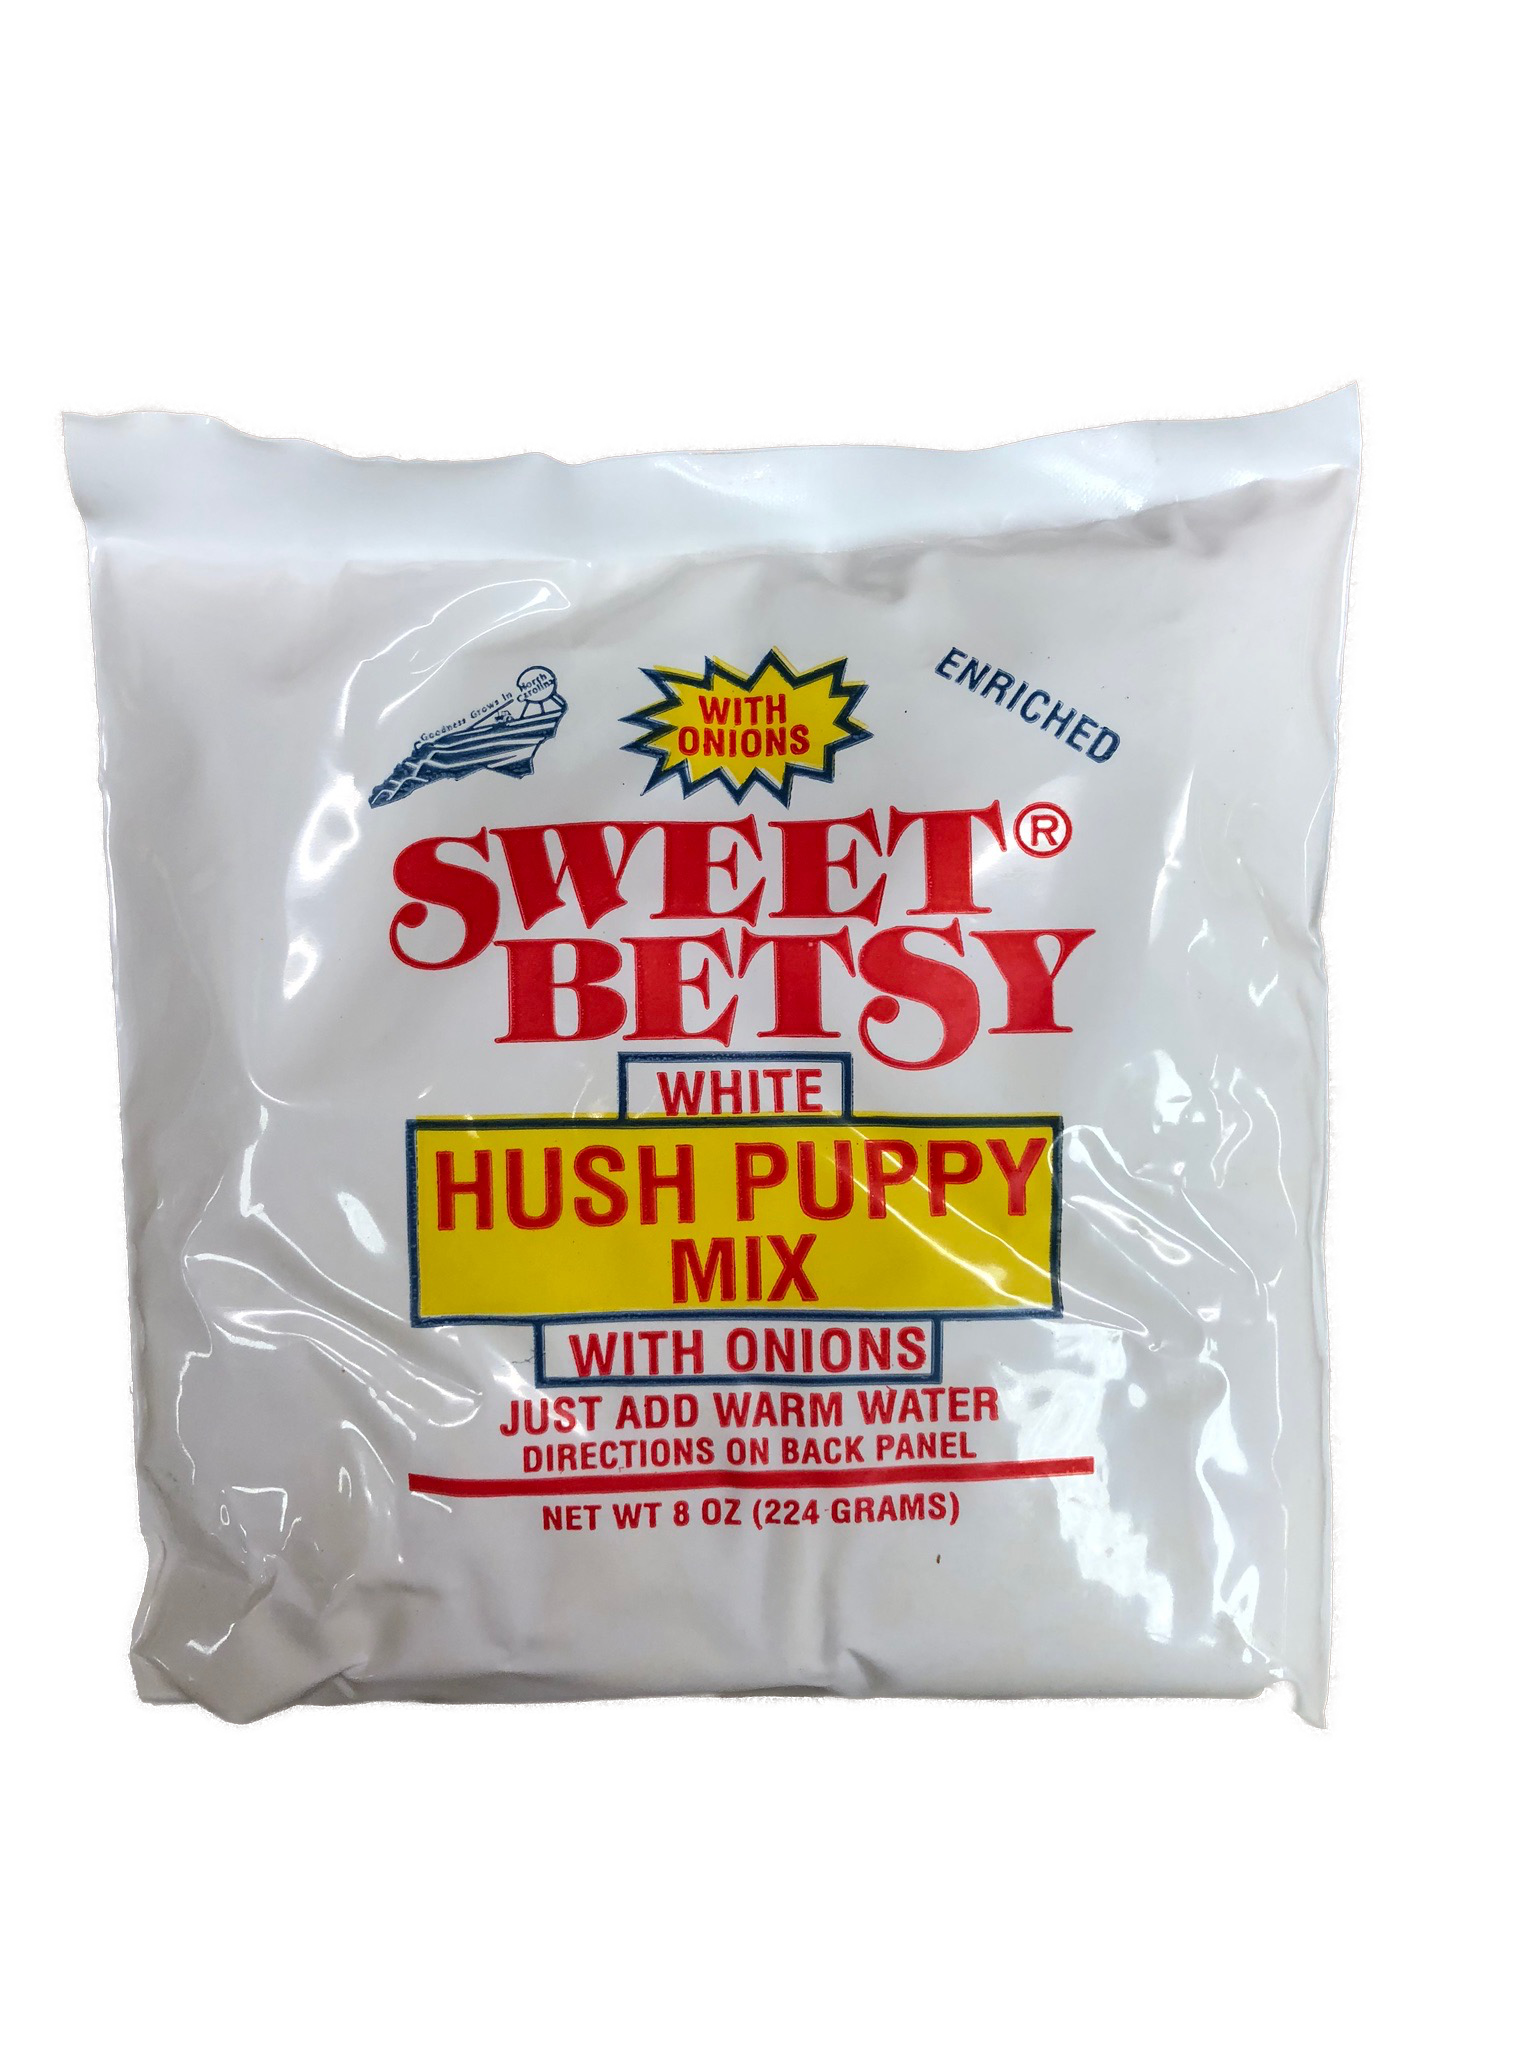 8 oz. - Atkinson's Sweet-Betsy Hushpuppy Mix with Onions